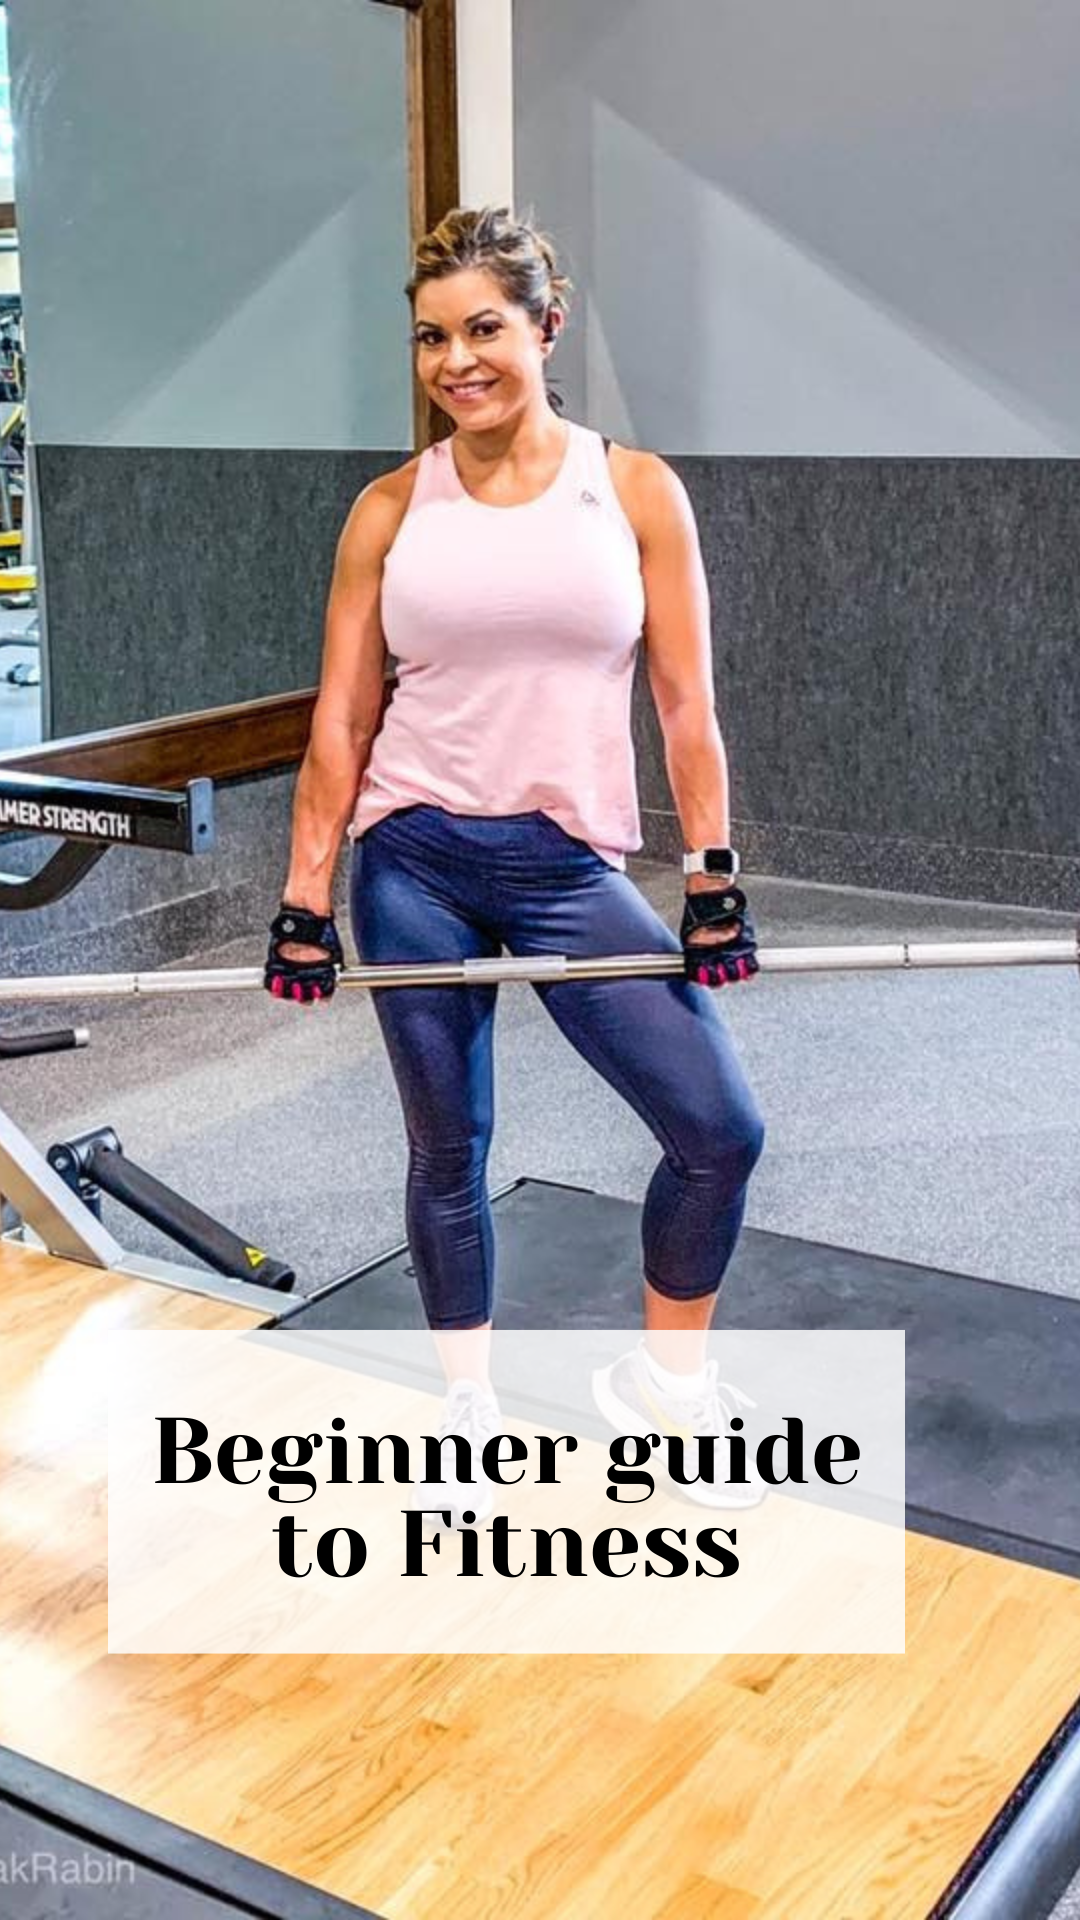 The Beginners Guide to fitness ( gym)